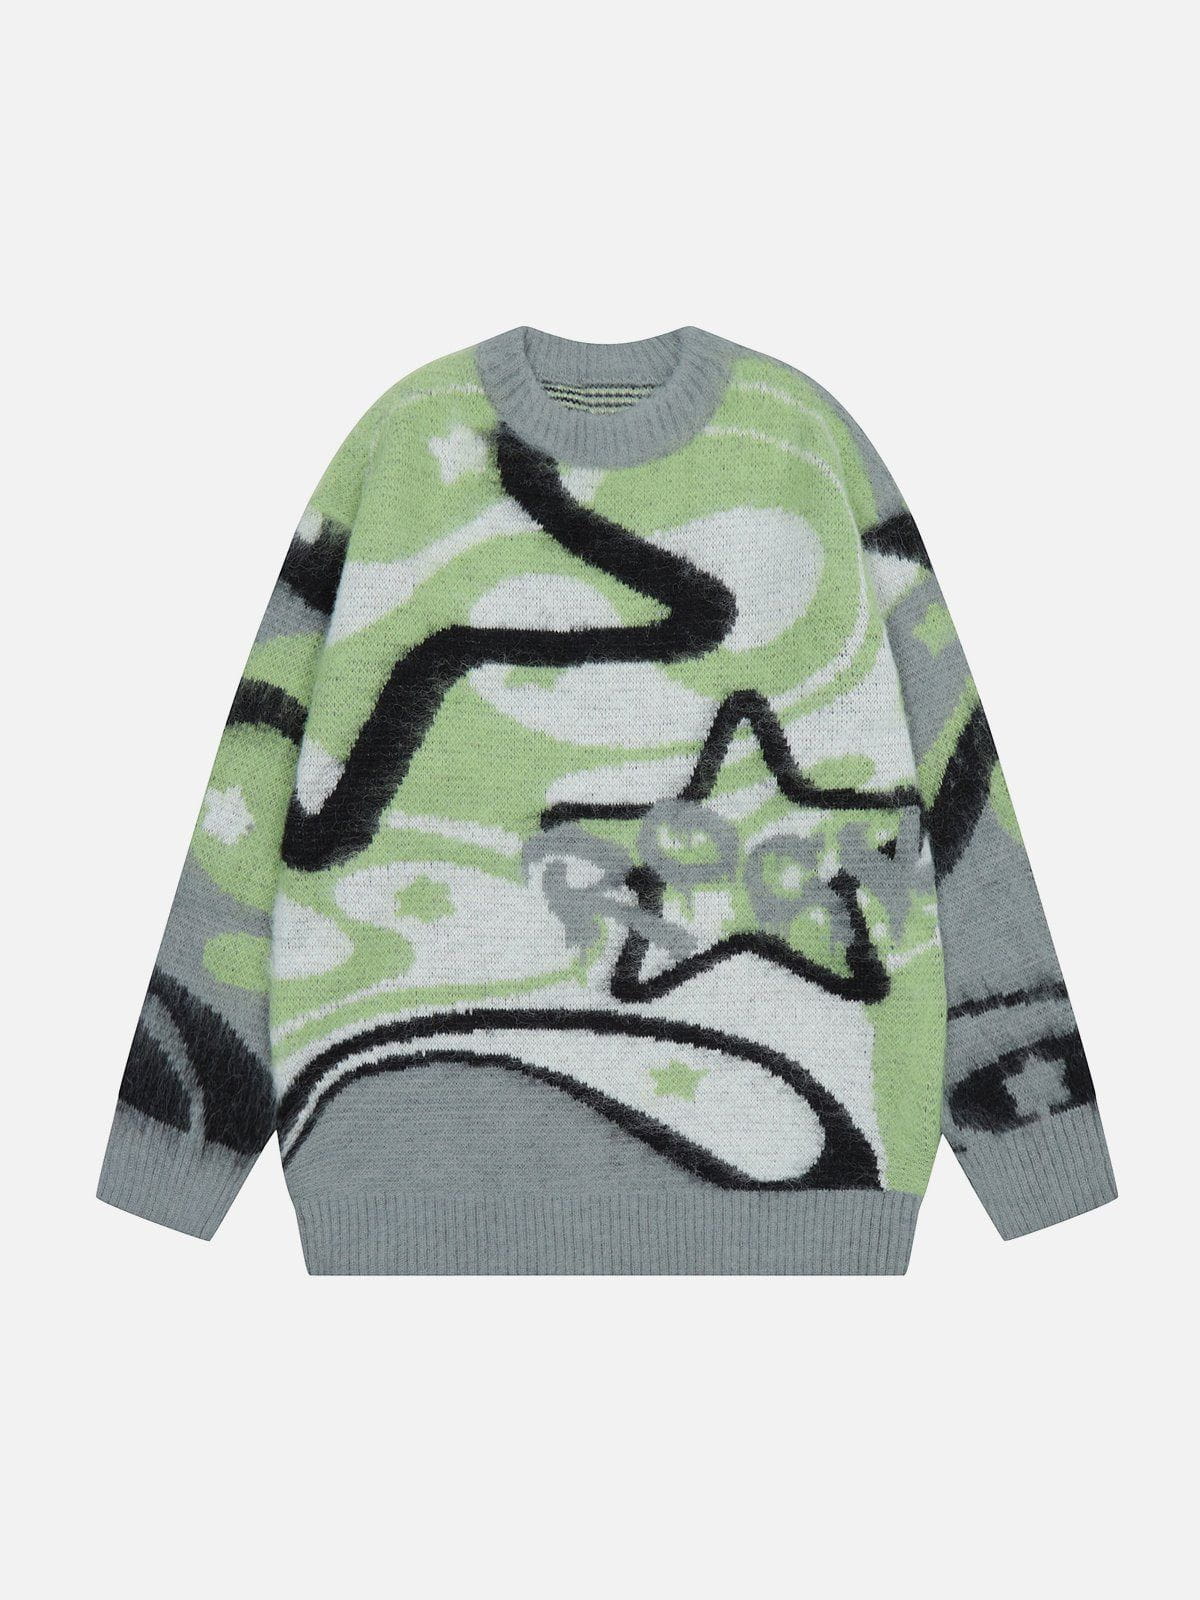 Collision Star Embroidery Sweater Streetwear Brand Techwear Combat Tactical YUGEN THEORY